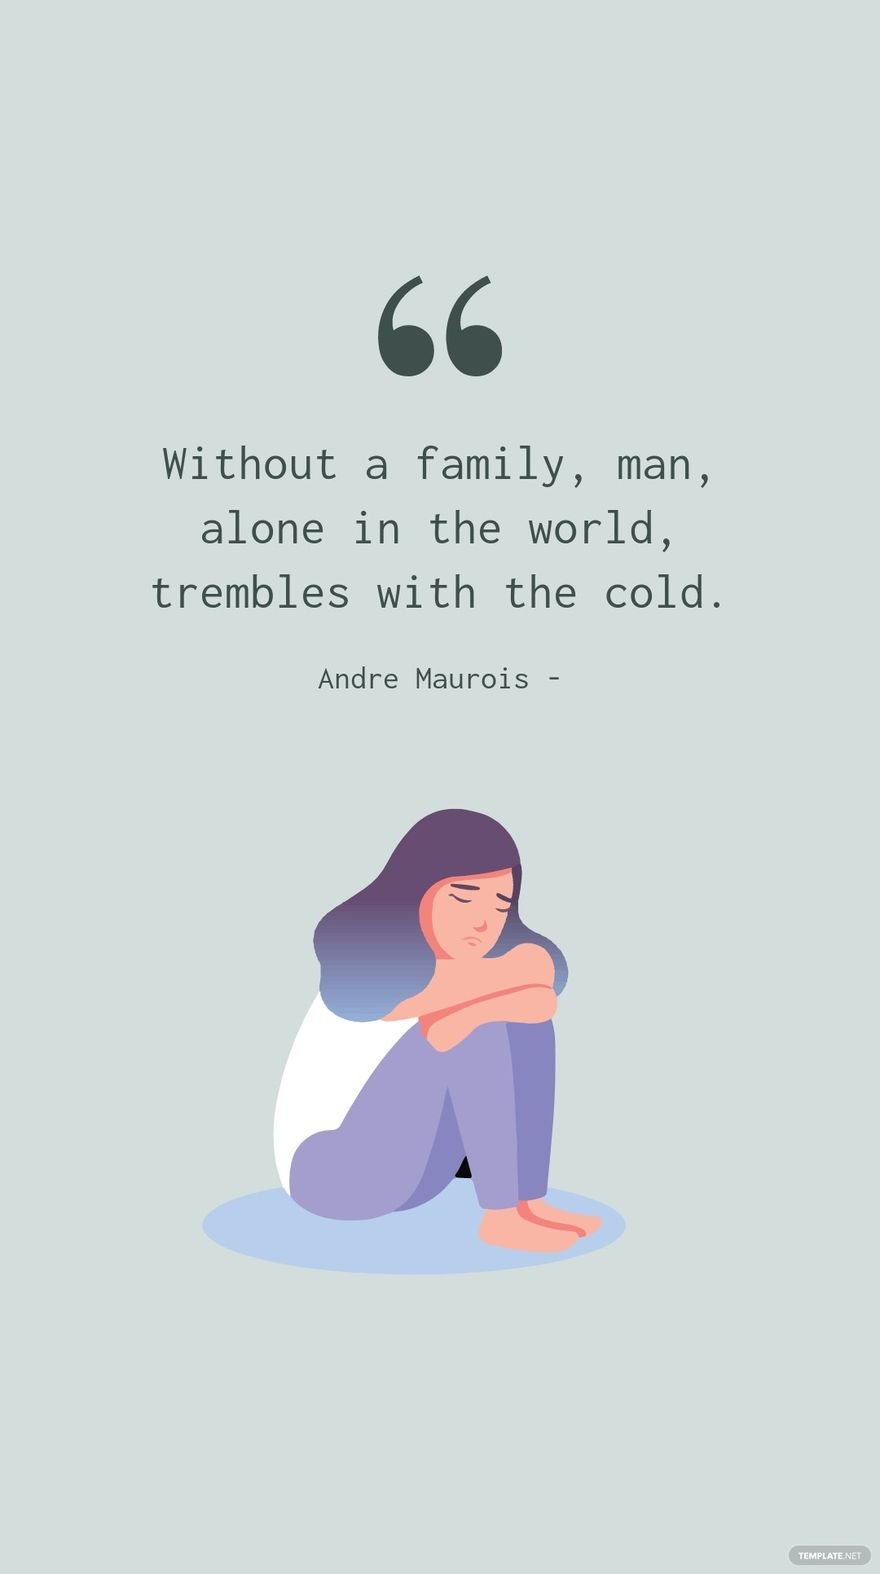 Andre Maurois - Without a family, man, alone in the world, trembles with the cold.